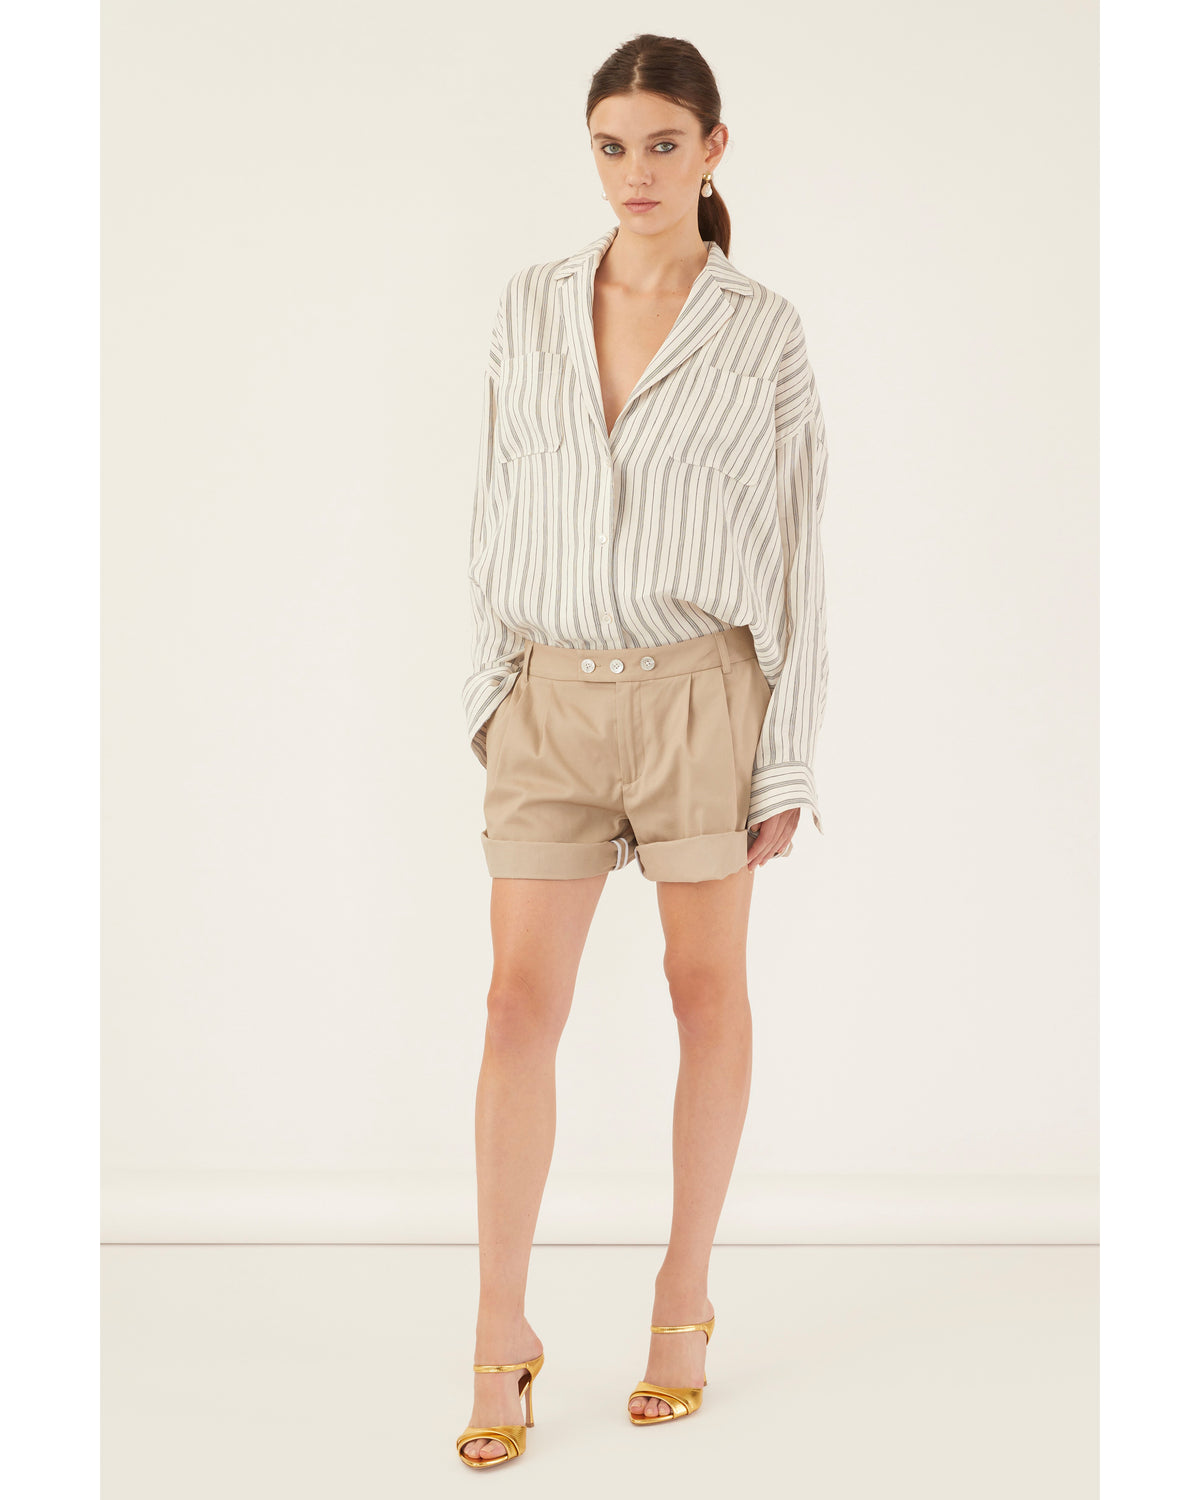 Bailey Pleated Chino Short in Sand Beige | MARISSA WEBBBailey Pleated Chino Short in Sand Beige | MARISSA WEBB